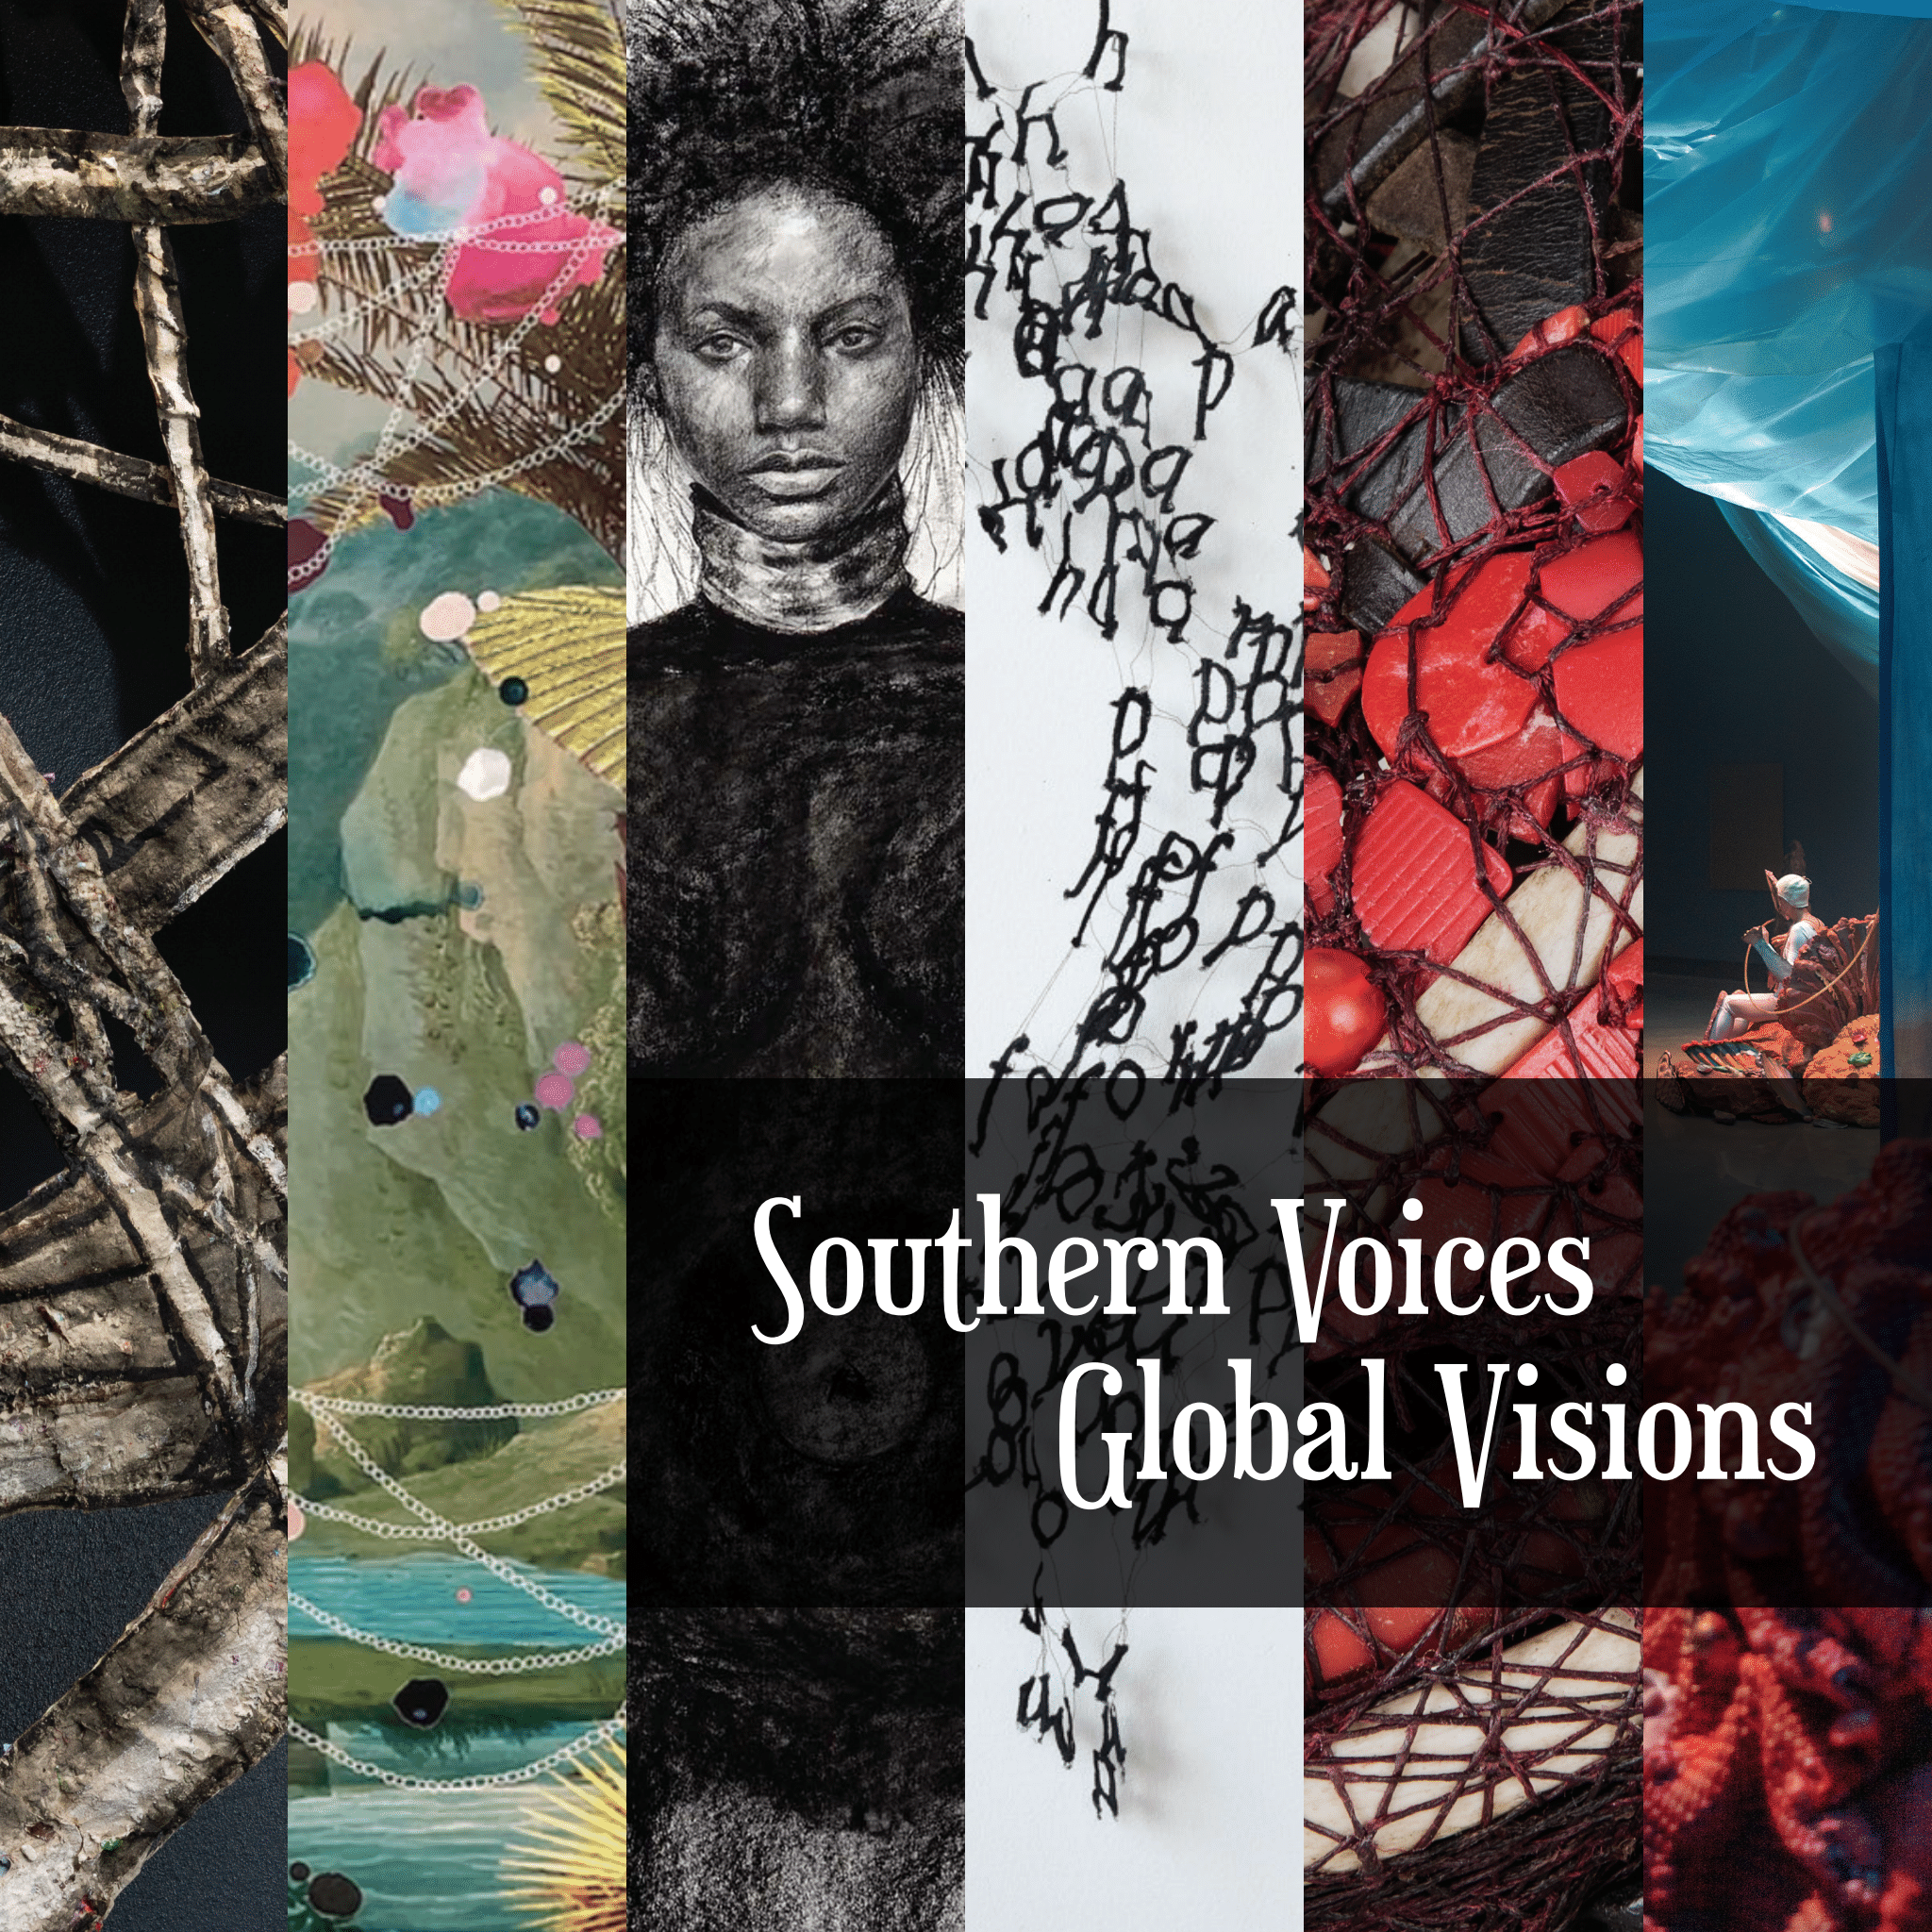 A banner with text reading "Southern Voices Global Visions"